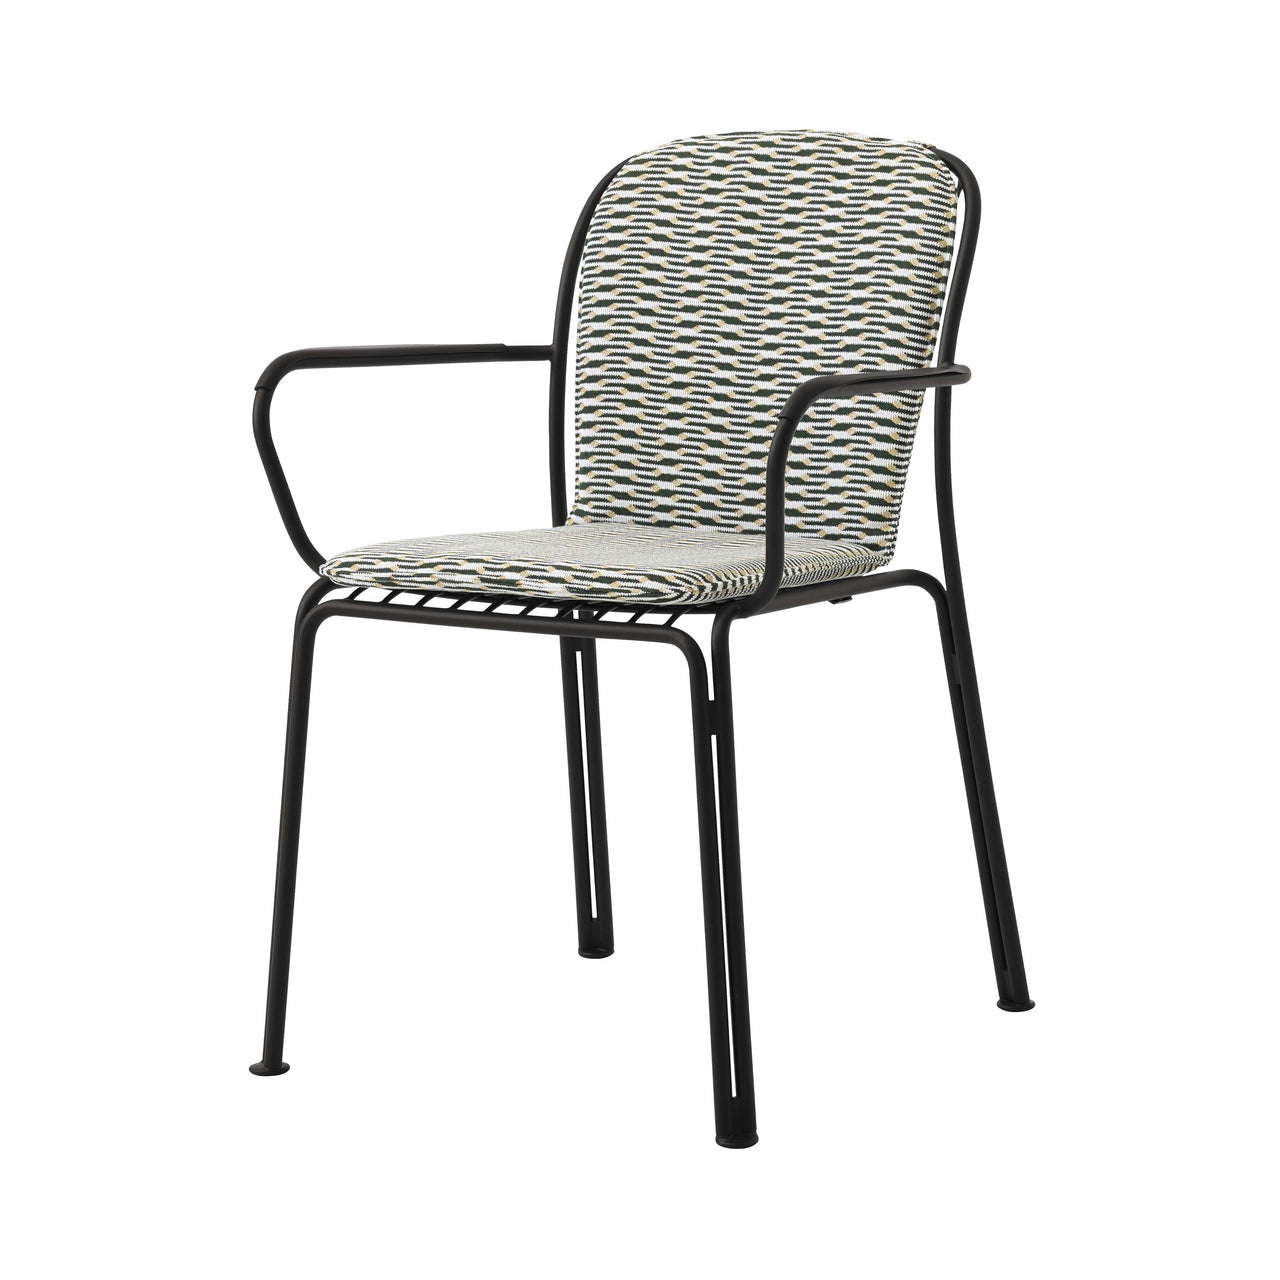 Thorvald SC95 Armchair: Outdoor + Warm Black + With Marquetry Bora Cushion